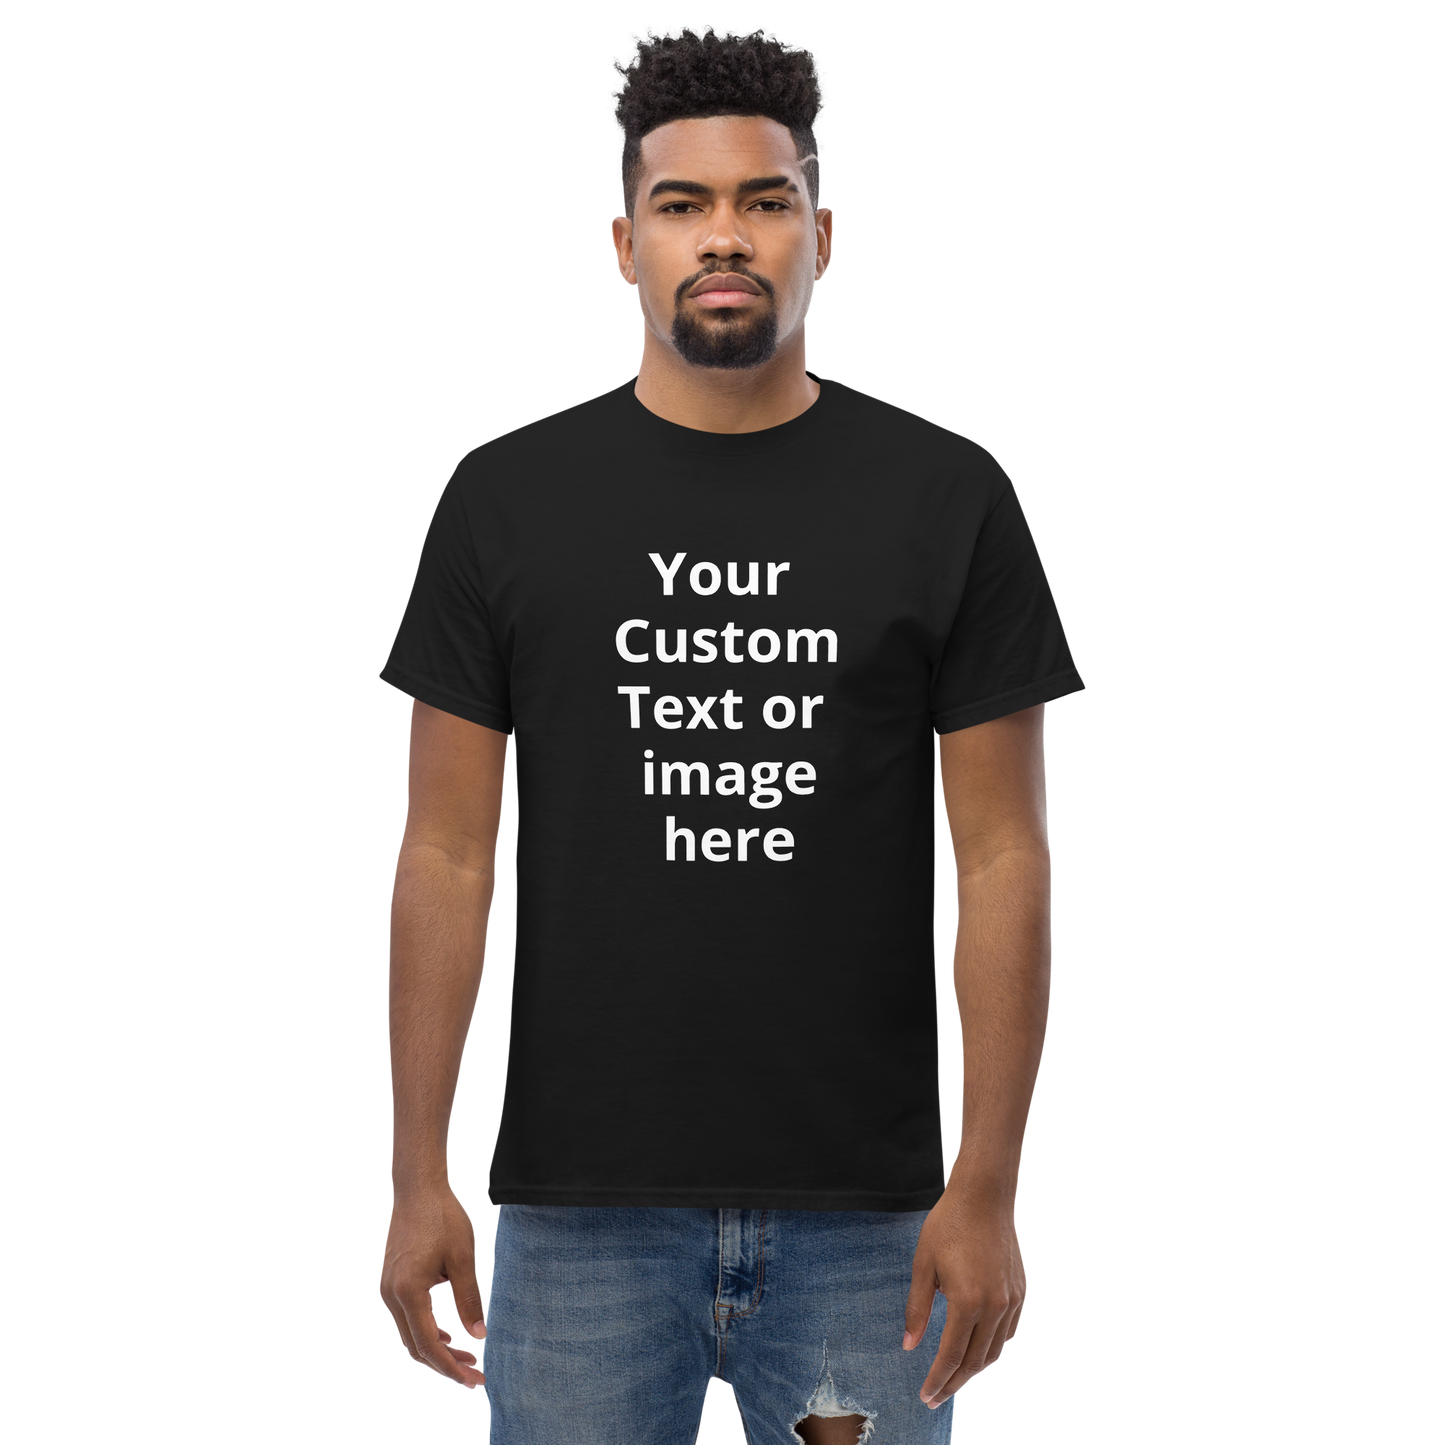 Personalised Custom T shirt with Custom message or image - Just send your text or image